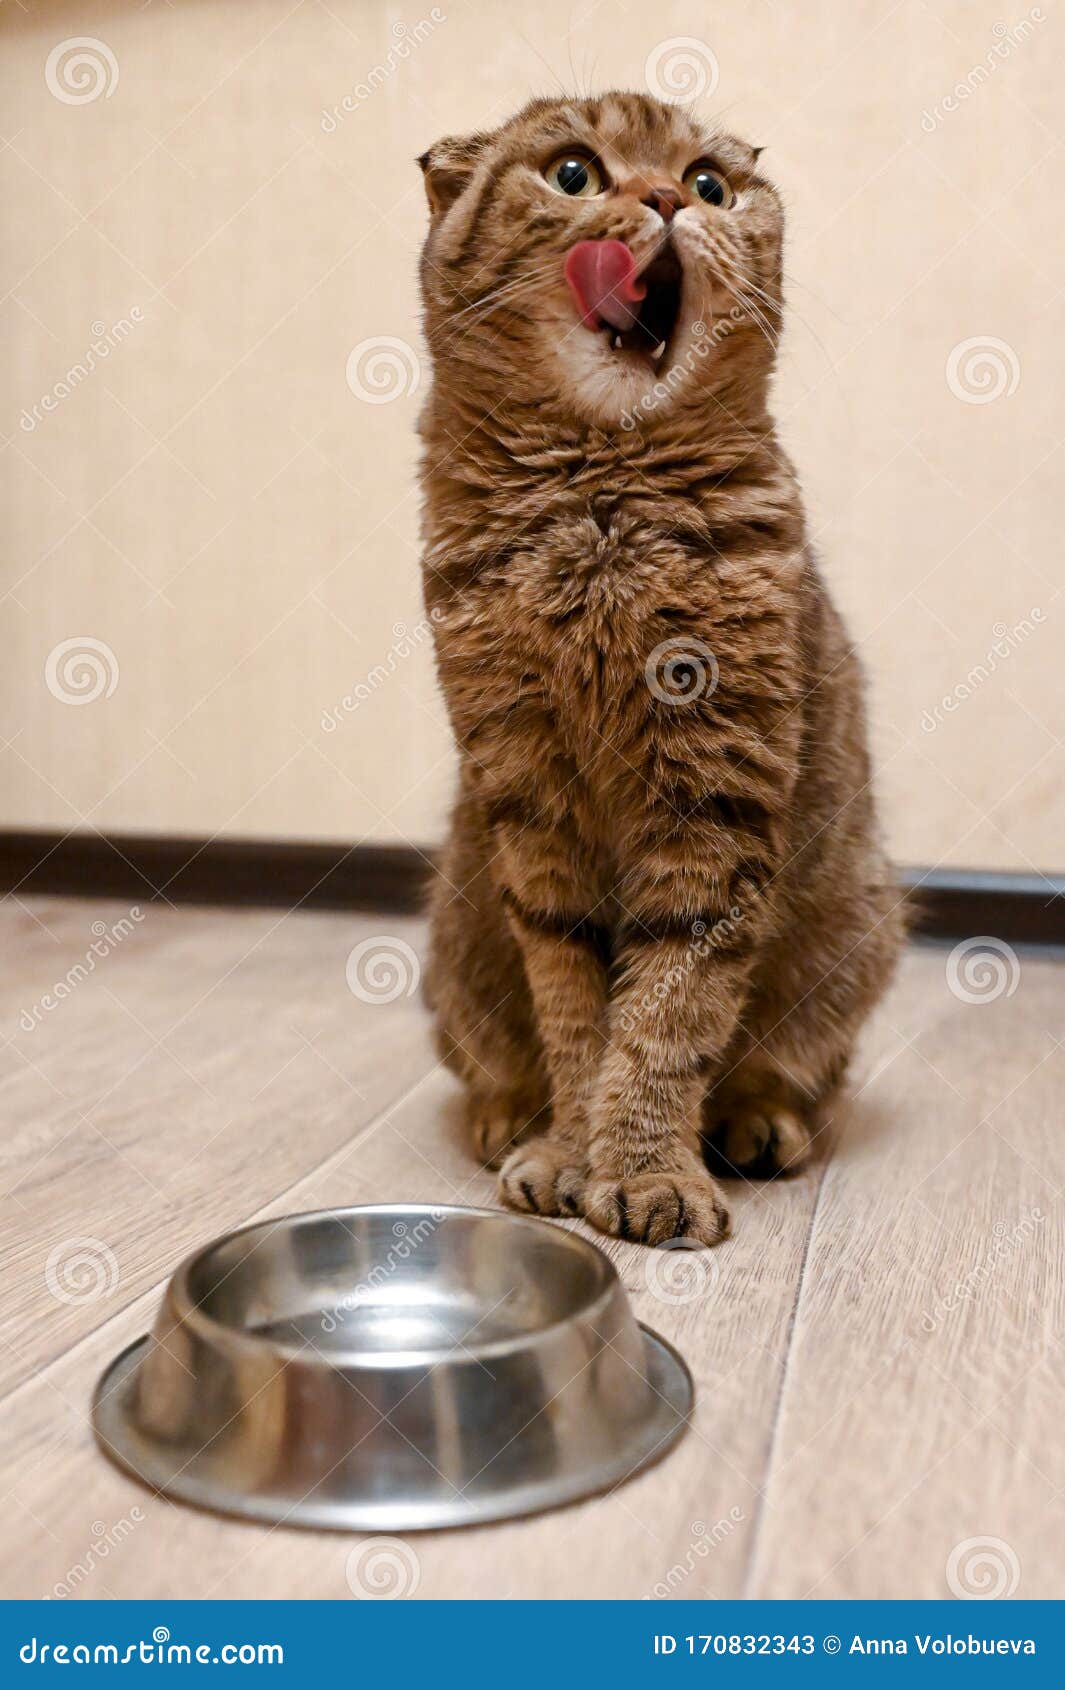 Hungry Funny Cat Looking and Waiting for Food Stock Image - Image of  looking, intelligent: 170832343